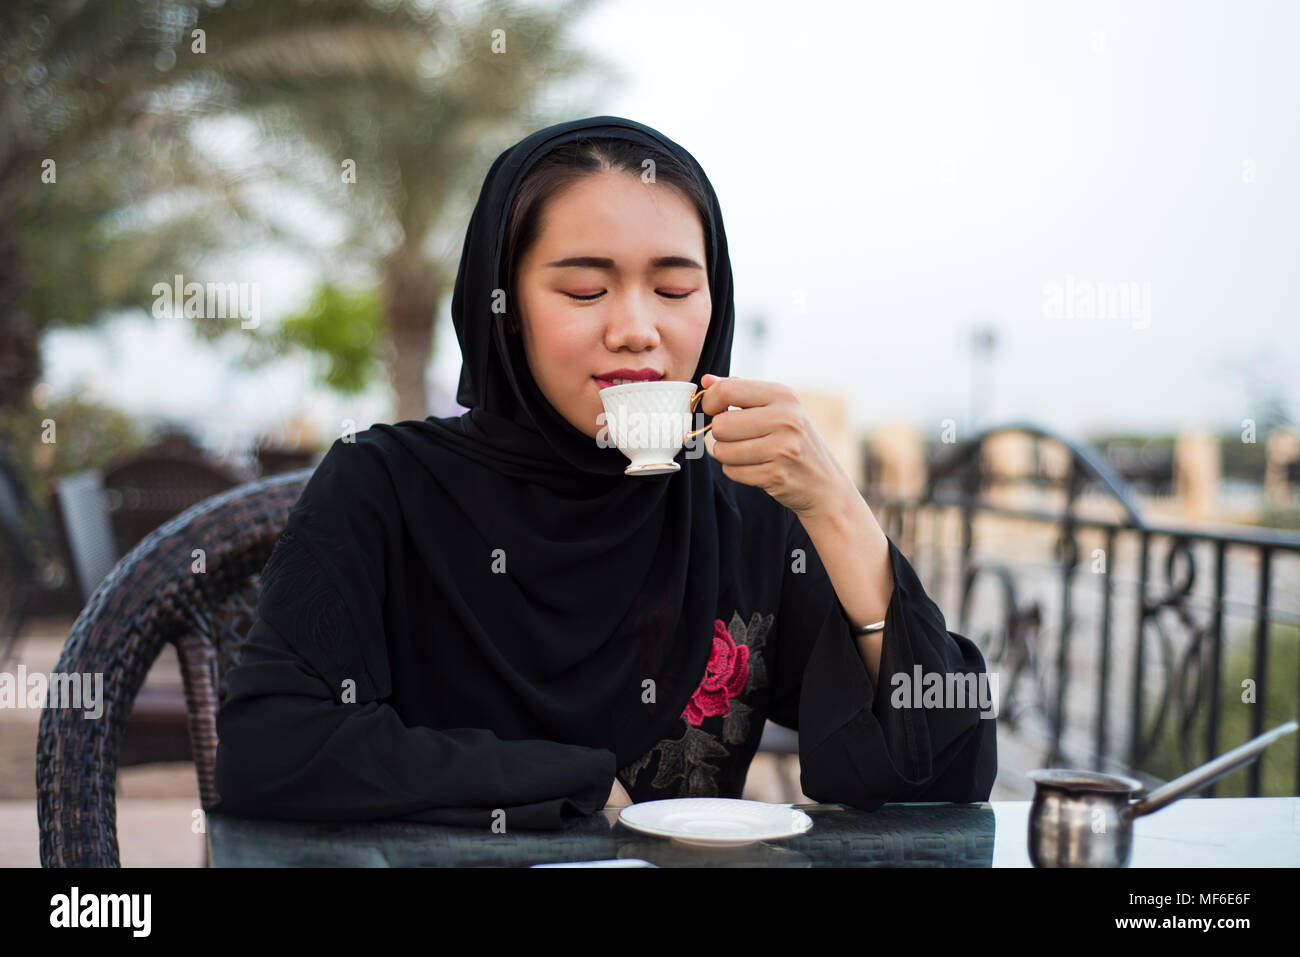 Muslim woman having a cup of coffee in a bar outdoors Stock Photo